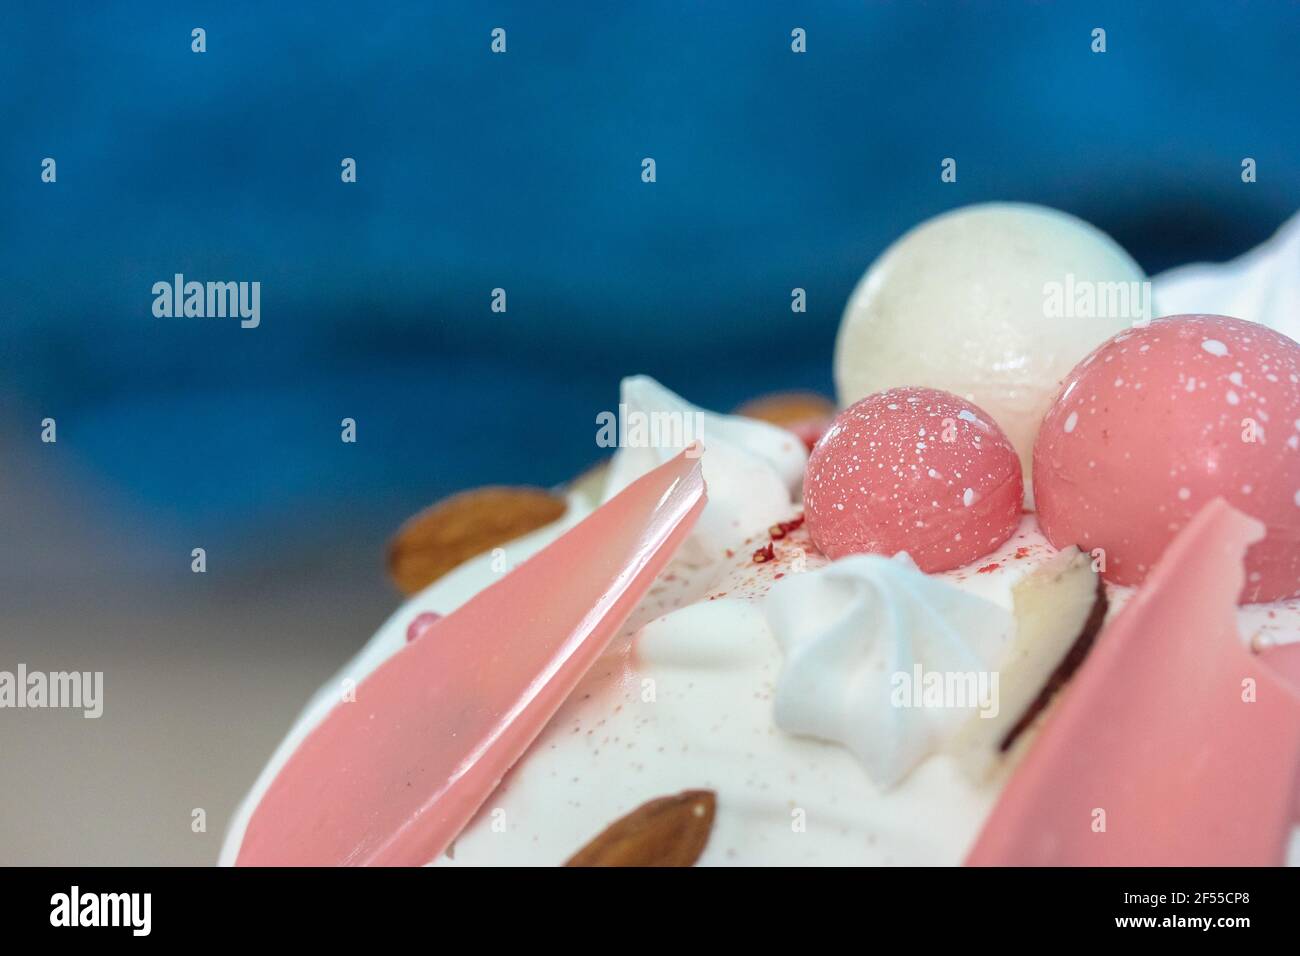 Easter cake decorated with white icing, meringue, pink decorative chocolate balls, nuts. Homemade Easter bread top view on blue background. A recipe f Stock Photo